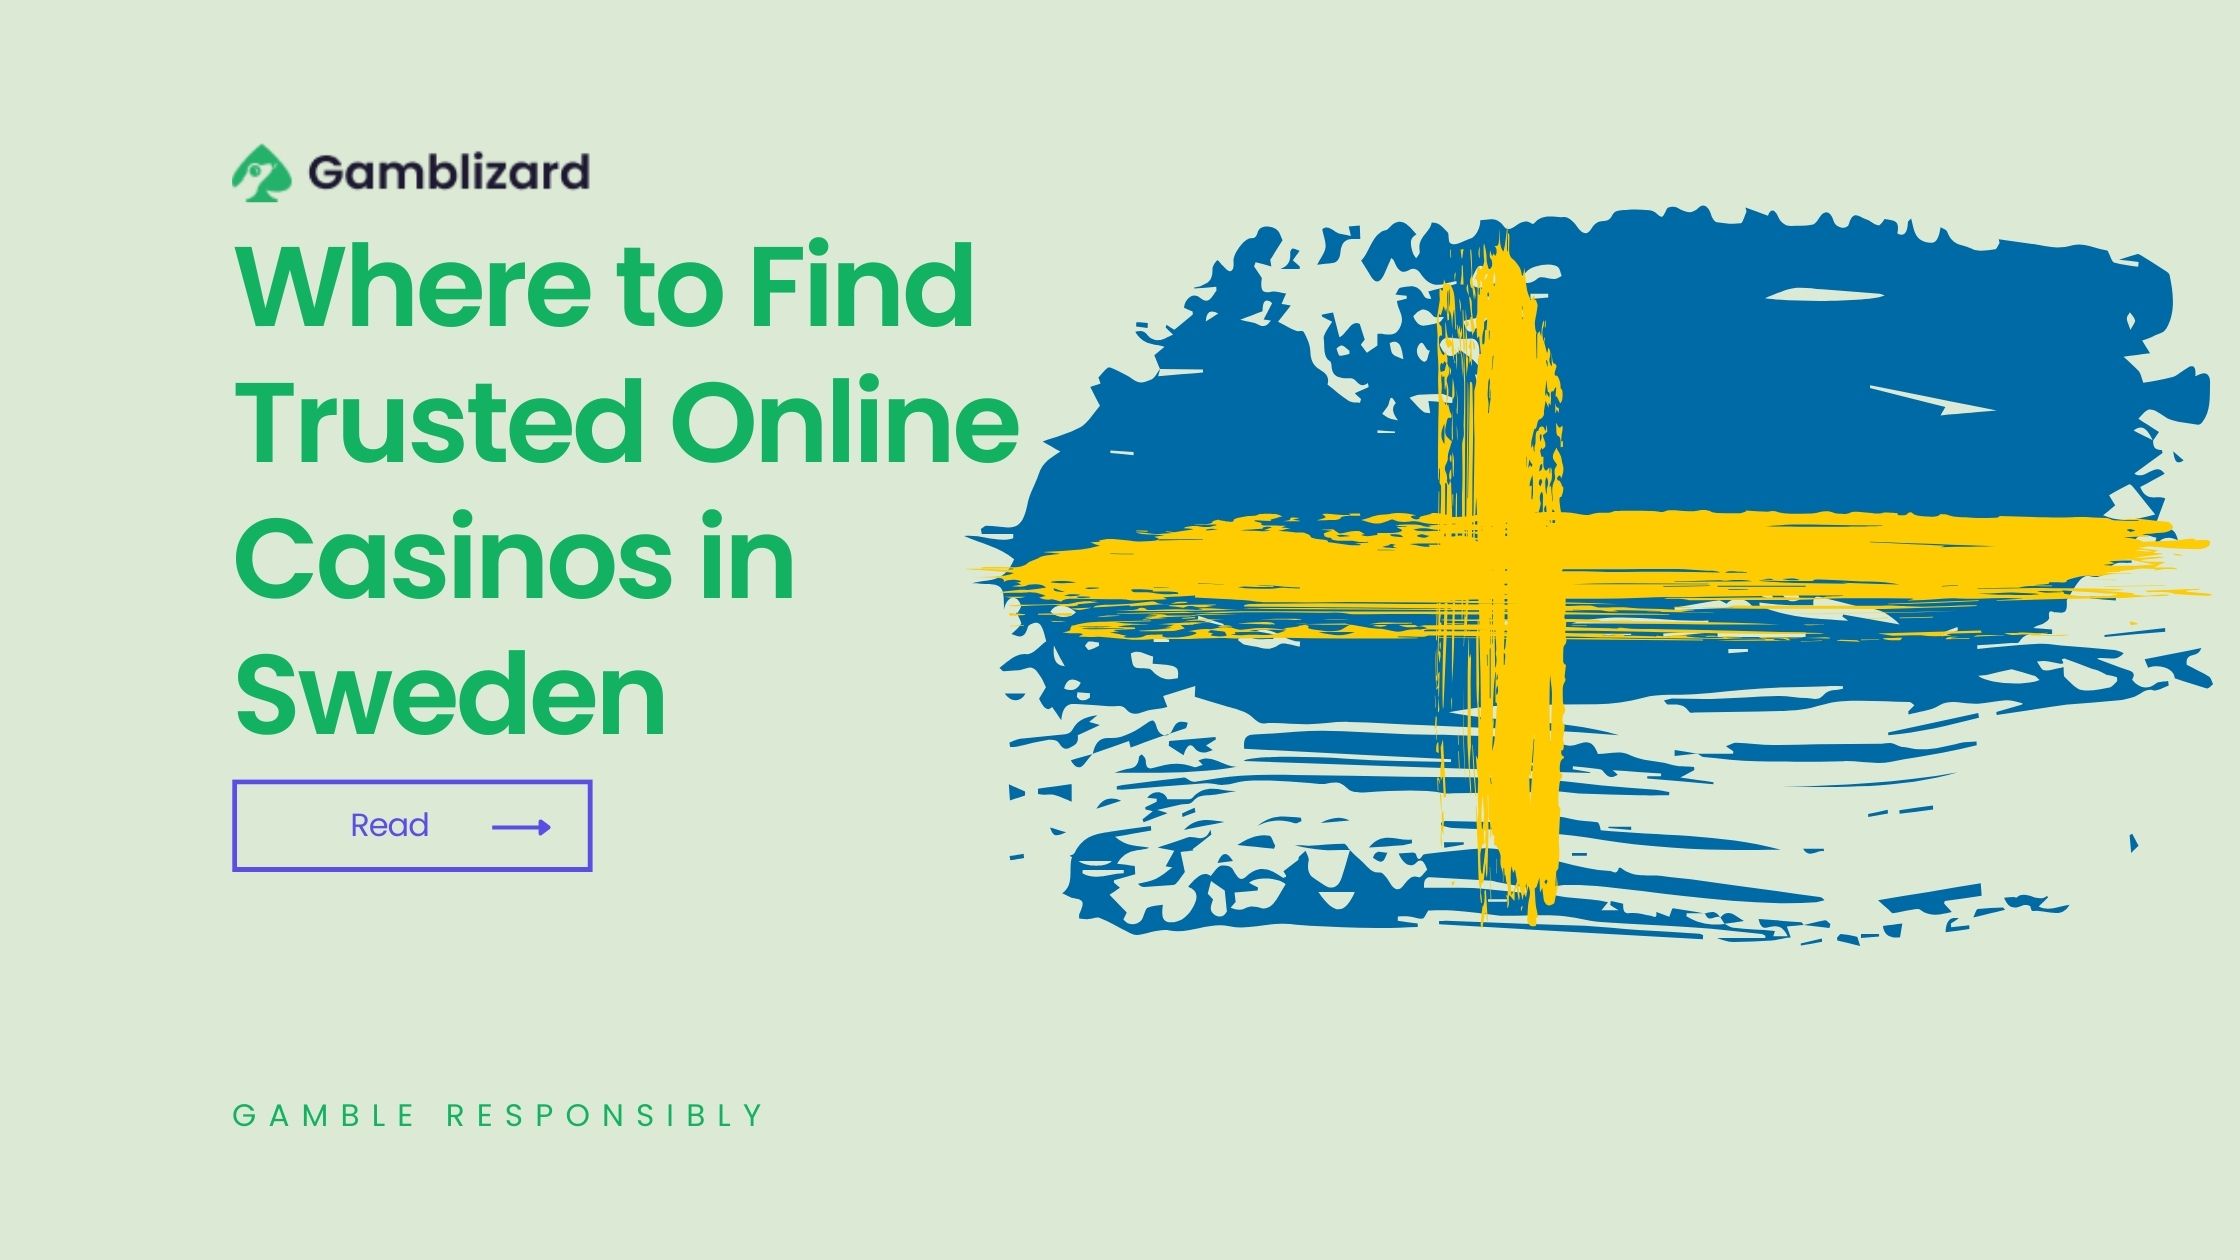 Where to Find Trusted Online Casinos in Sweden